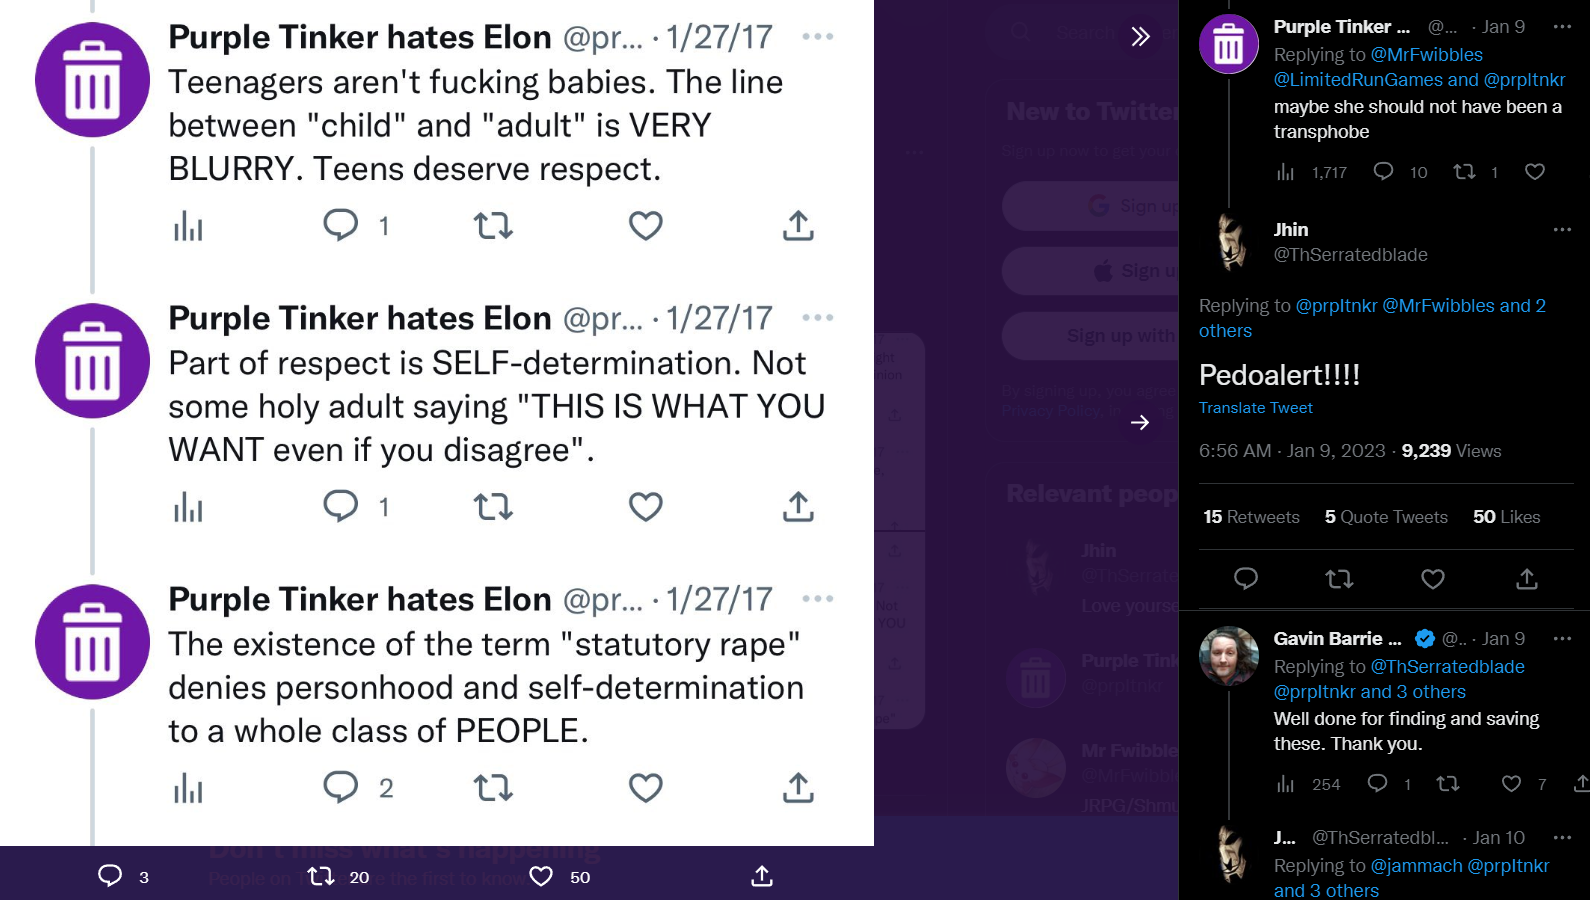 TheSerratedBlade shares alleged tweets of Purple Tinker seemingly advocating for pedophilia via Twitter